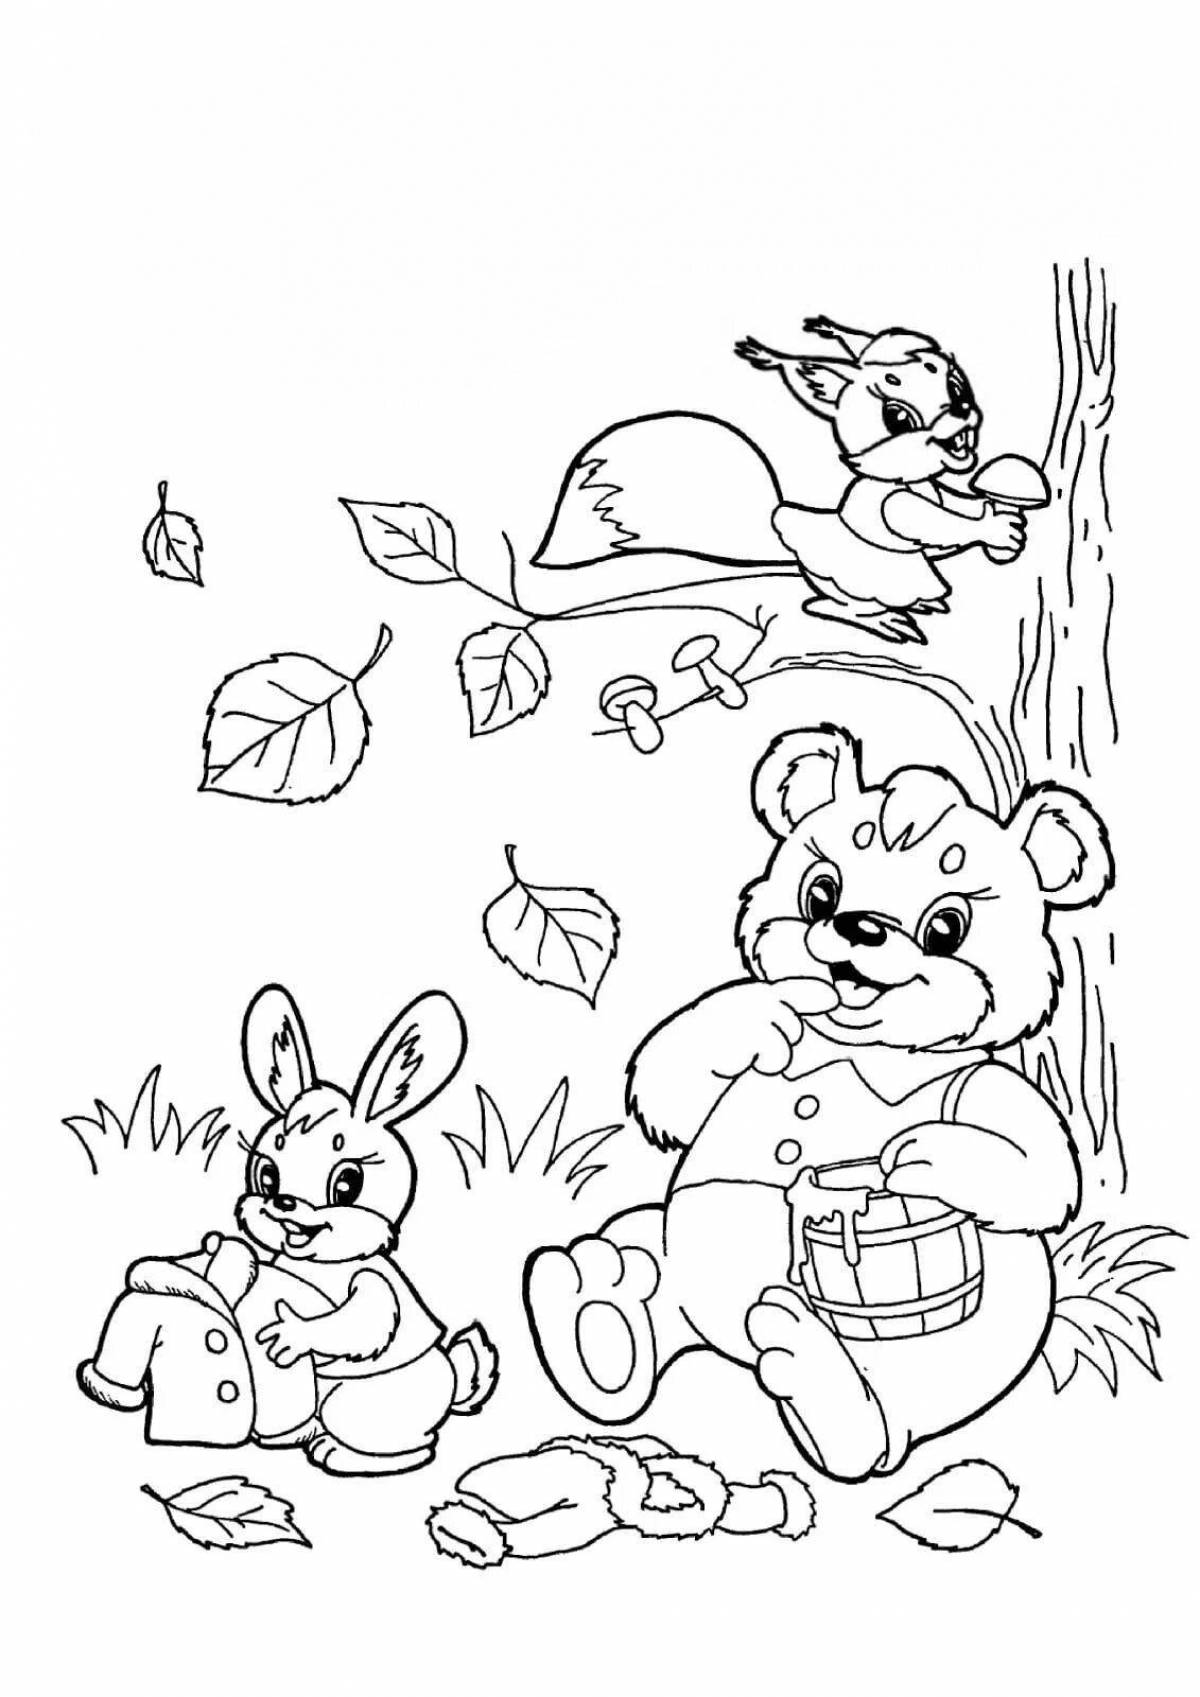 Coloring book bright hare and squirrel